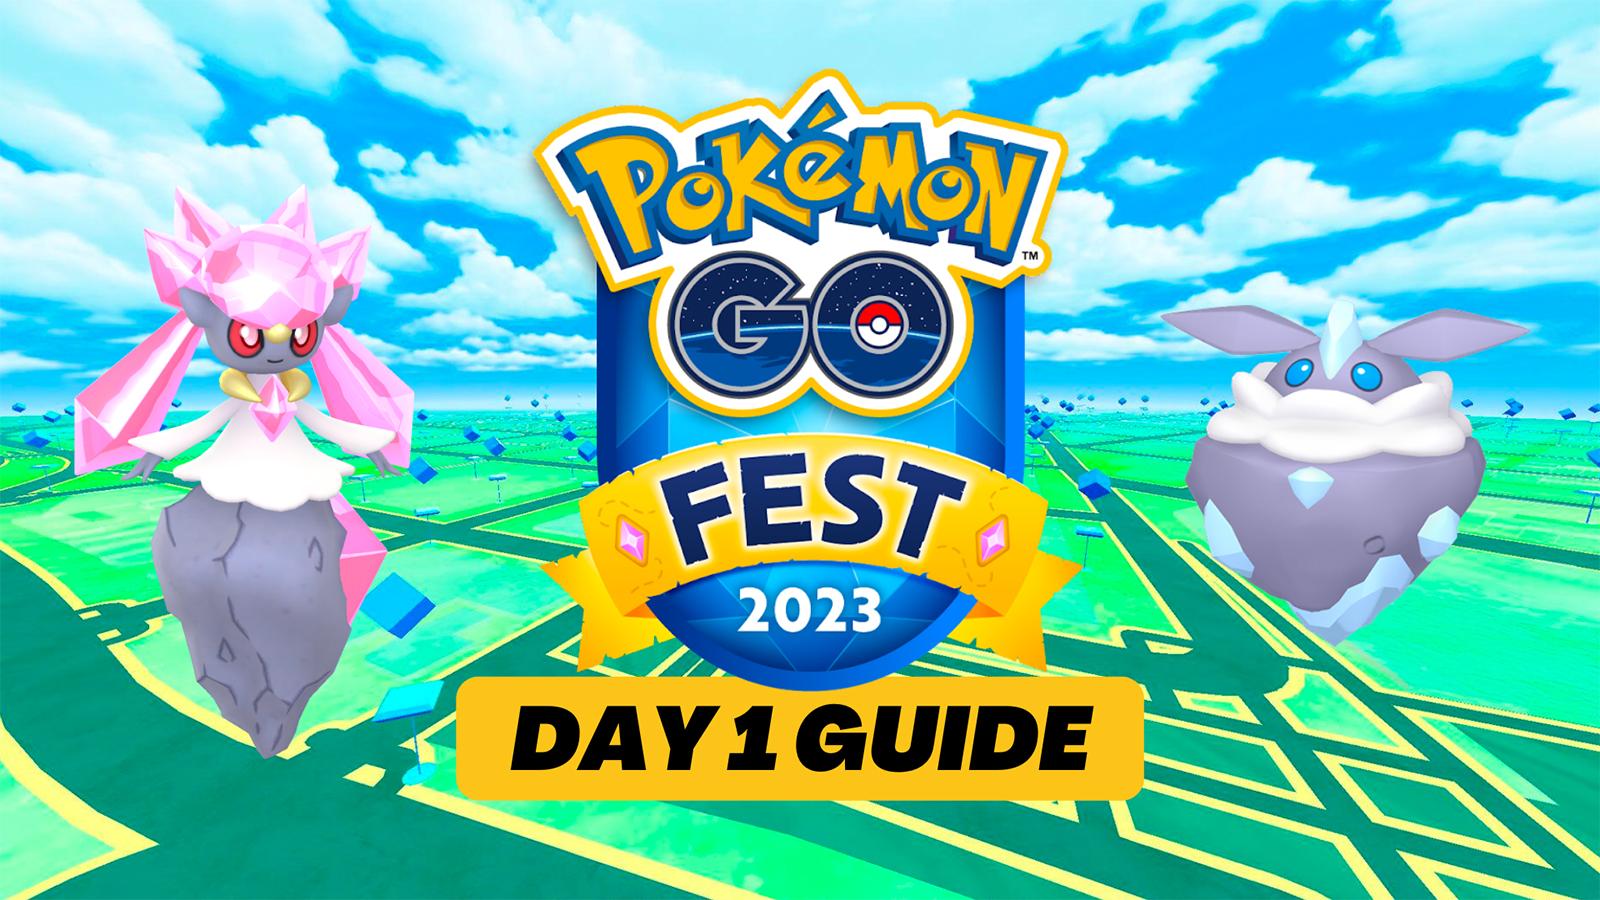 Diancie appearing in Pokemon Go Fest 2023 Global Day one